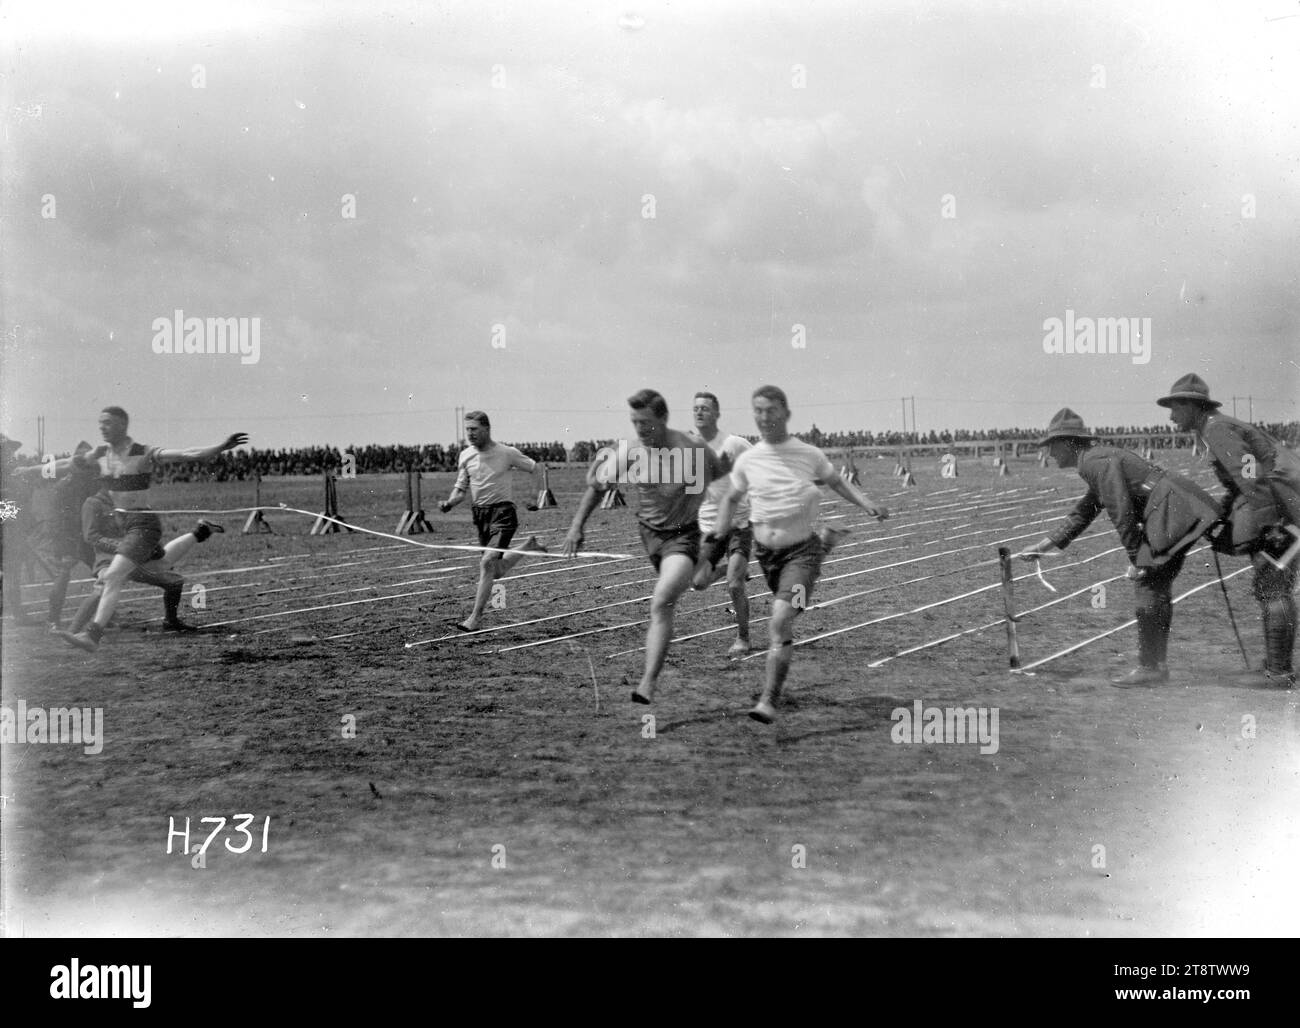 The finish of the 100 yards race, Authie, France, Soldiers reaching the finishing line in the hundred yards race at the New Zealand Divisional sports in Authie during World War I. Photograph taken 27 July 1918 Stock Photo